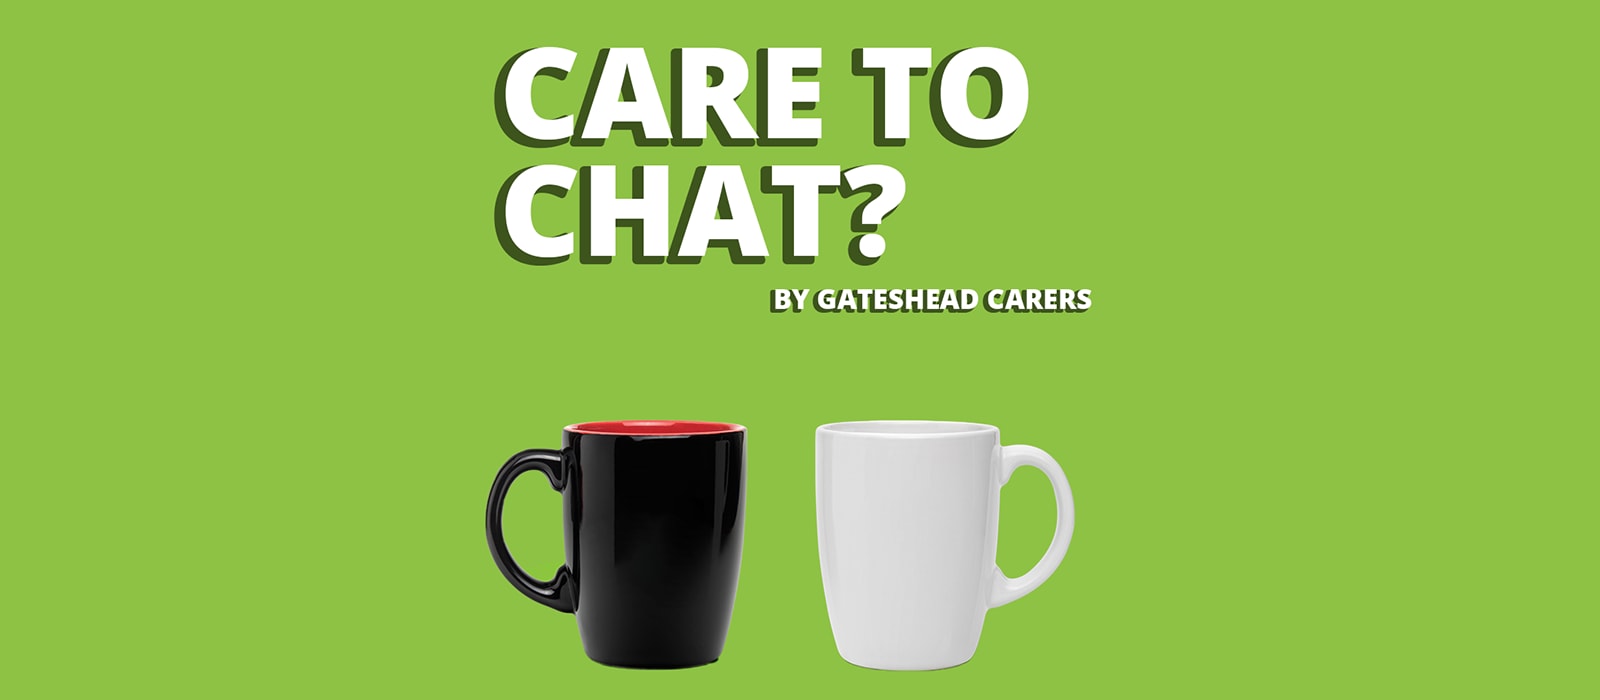 Care to Chat? - Episode 3 | Carer Caf&#233;